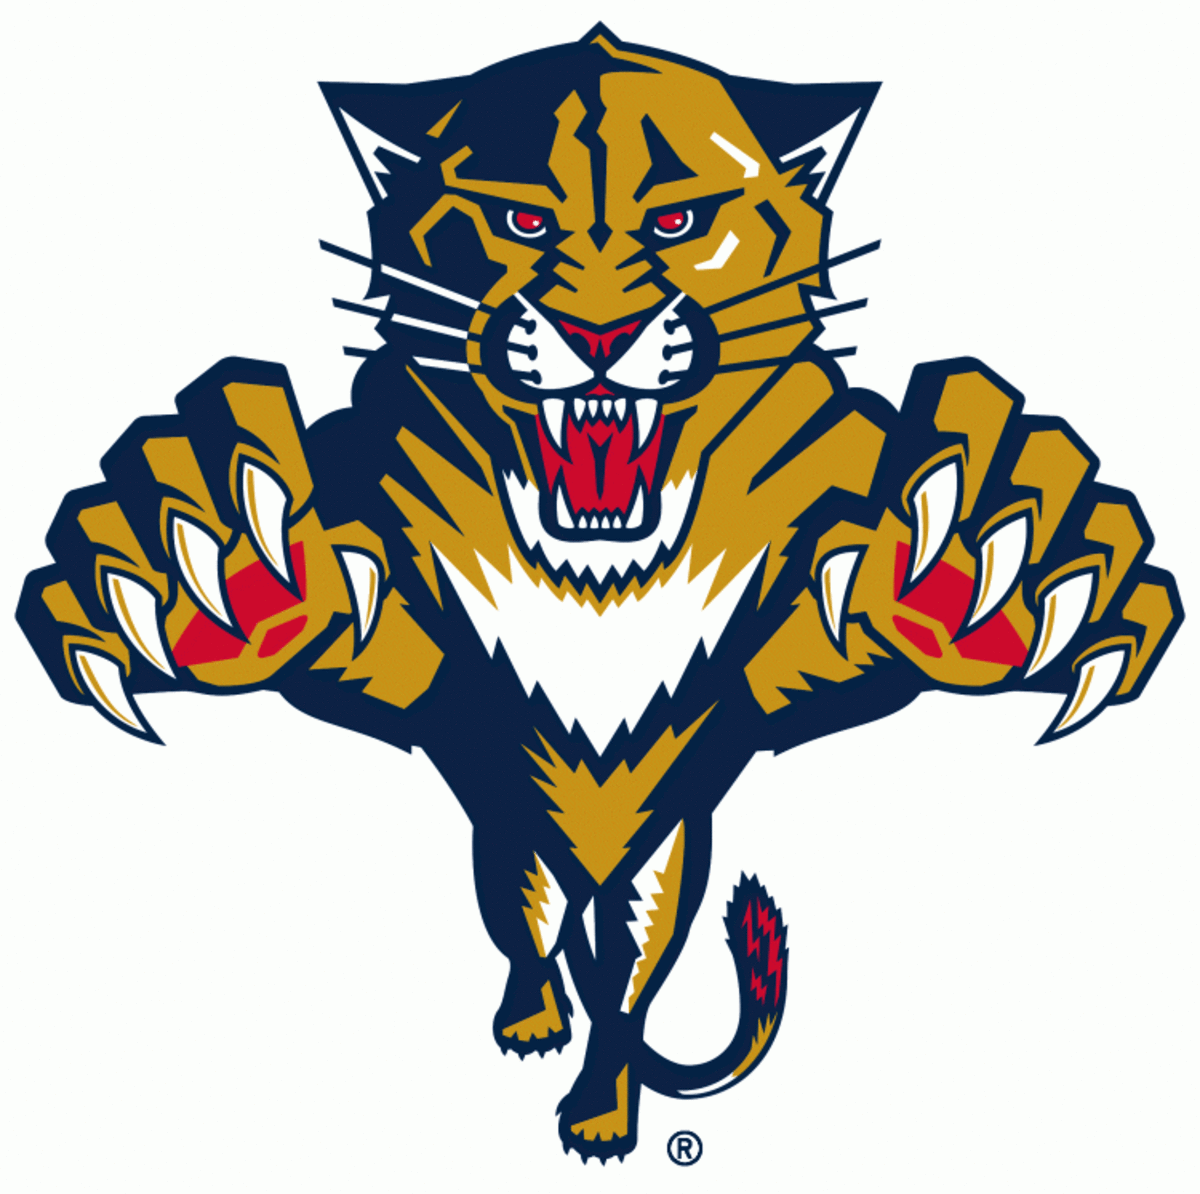 Florida Panthers Primary Logo (2000) - A gold, blue, and red Florida panther leaping forward. Shades of blue and red have been altered from original team logo